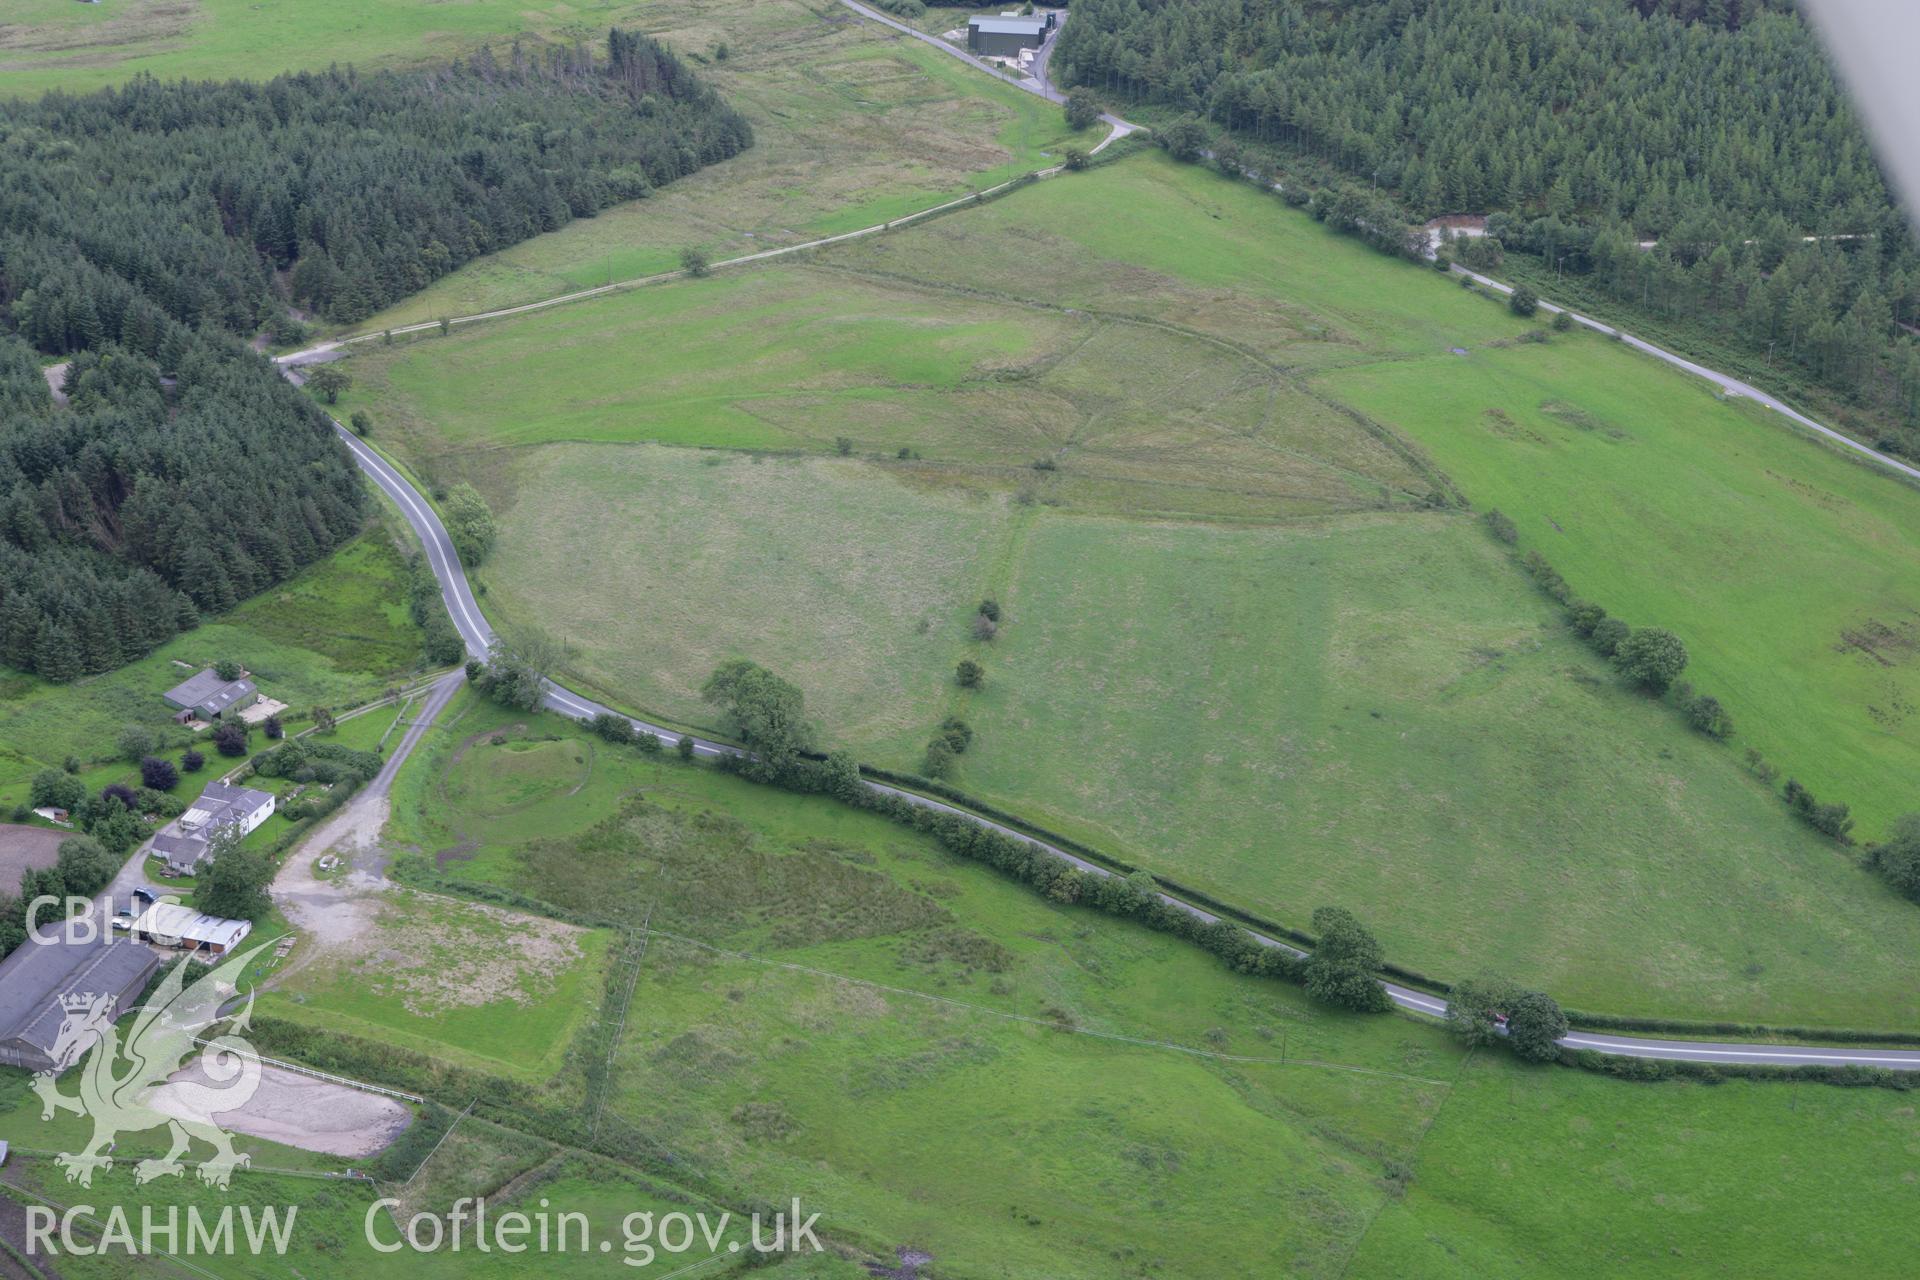 RCAHMW colour oblique aerial photograph of Maes Maelor Mound barrows. Taken on 24 July 2007 by Toby Driver